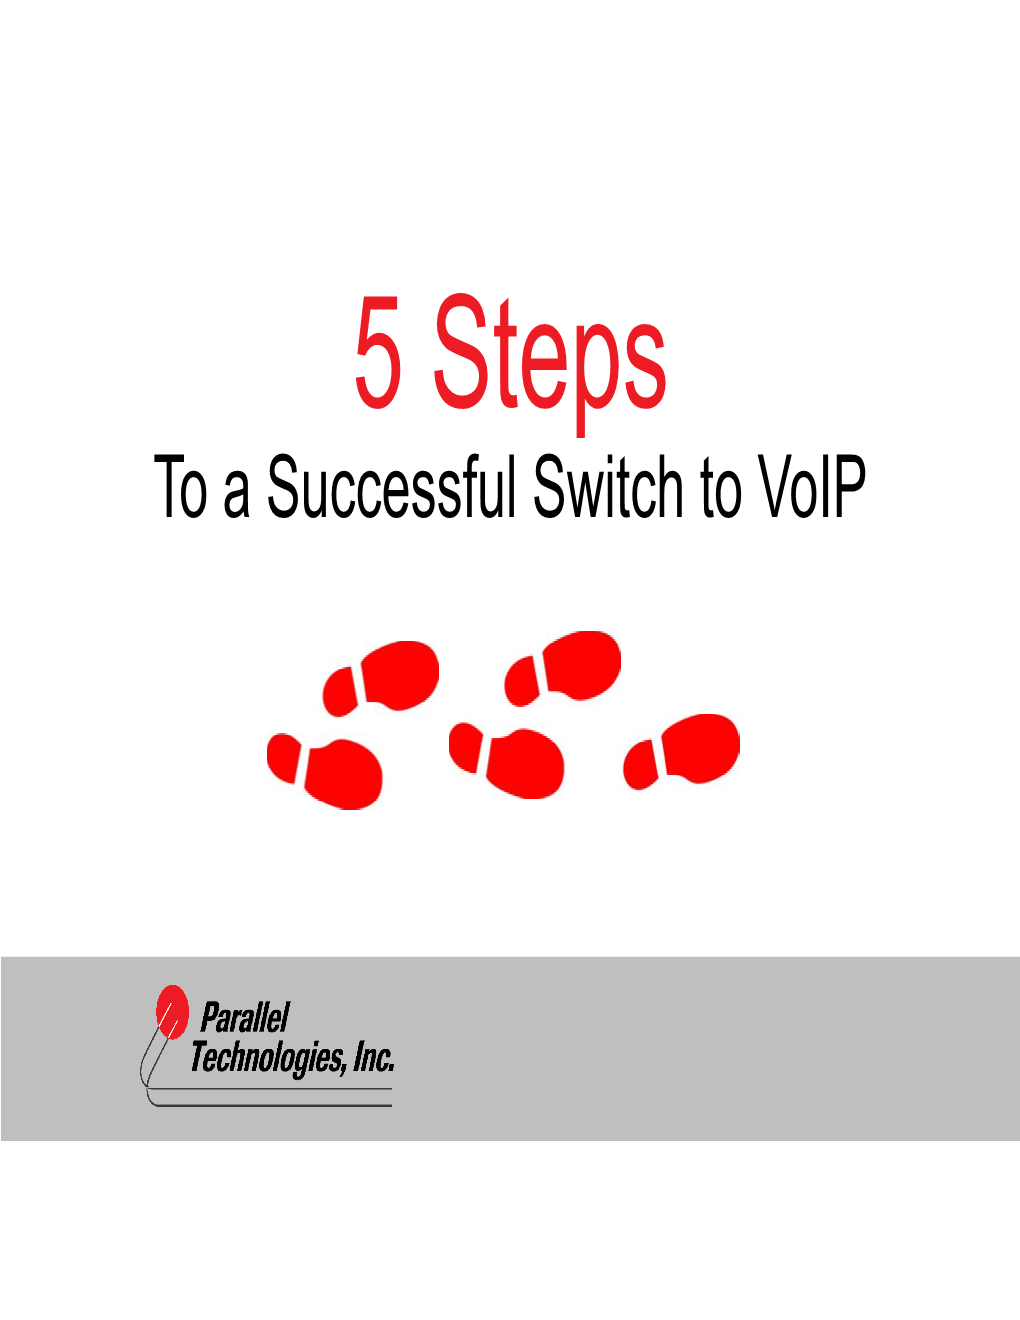 5 Steps to a Successful Switch to Voip Switching Your Phone System to a Voip Provider